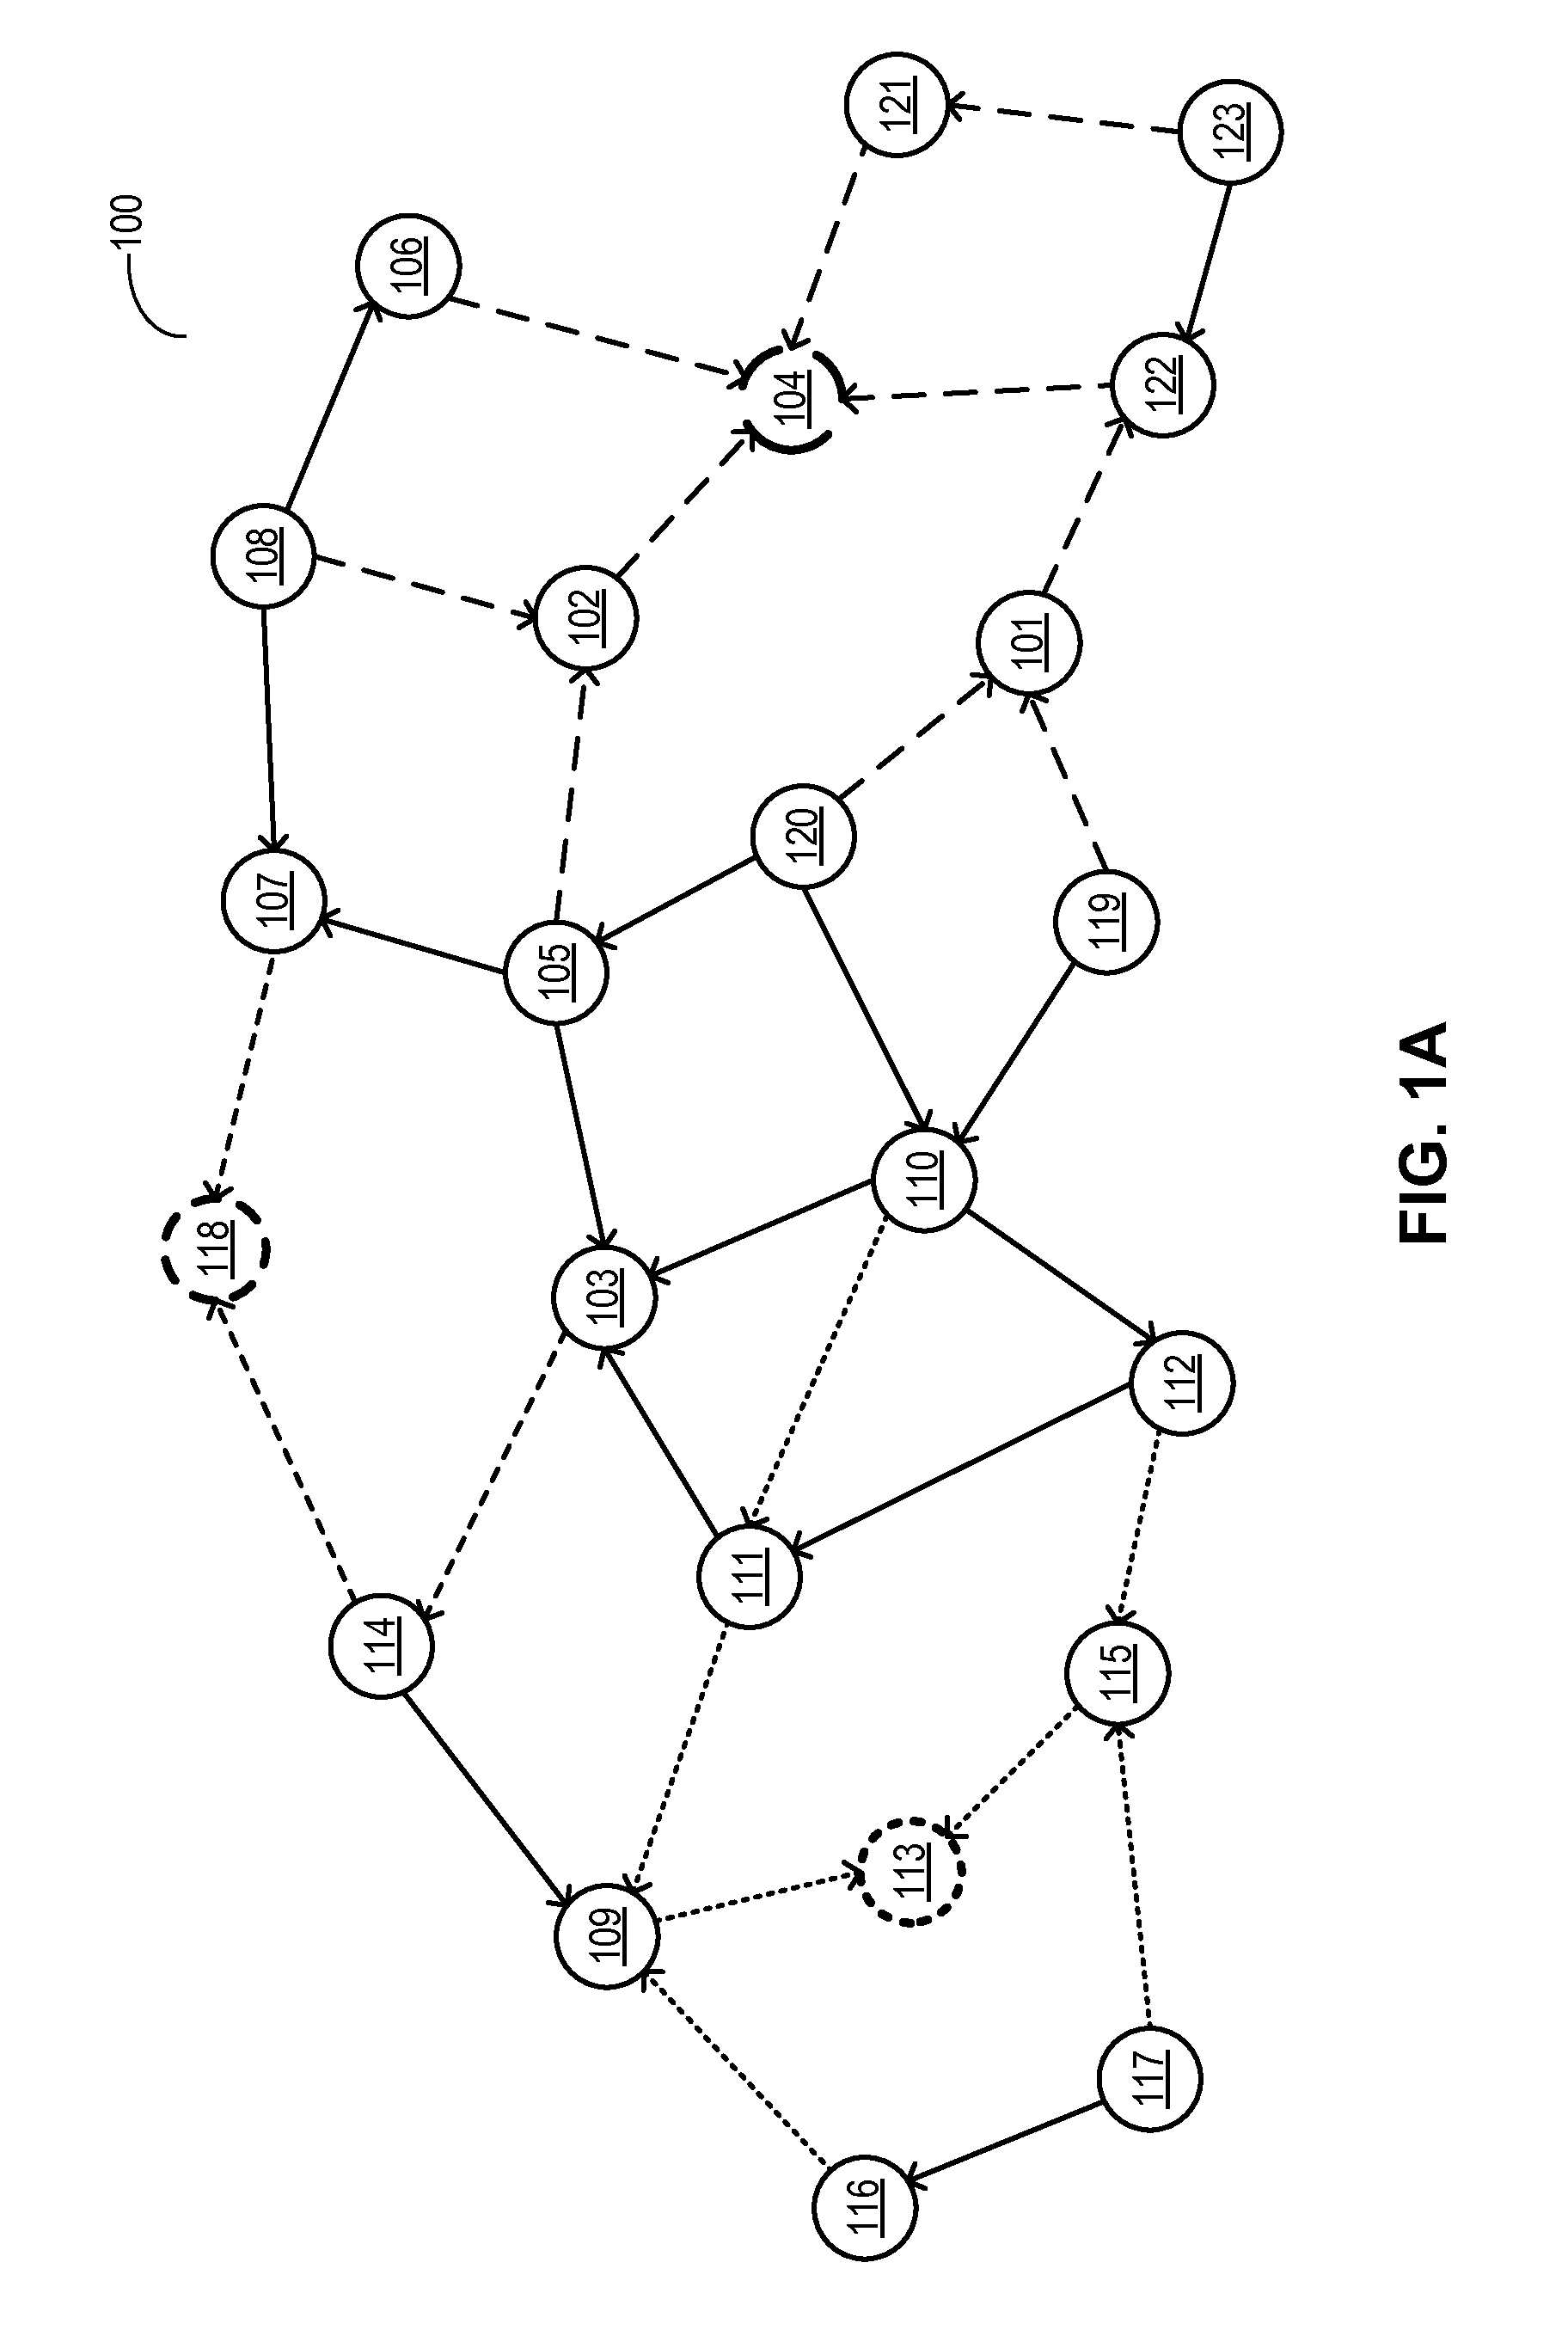 Distance-based routing in an information-centric network